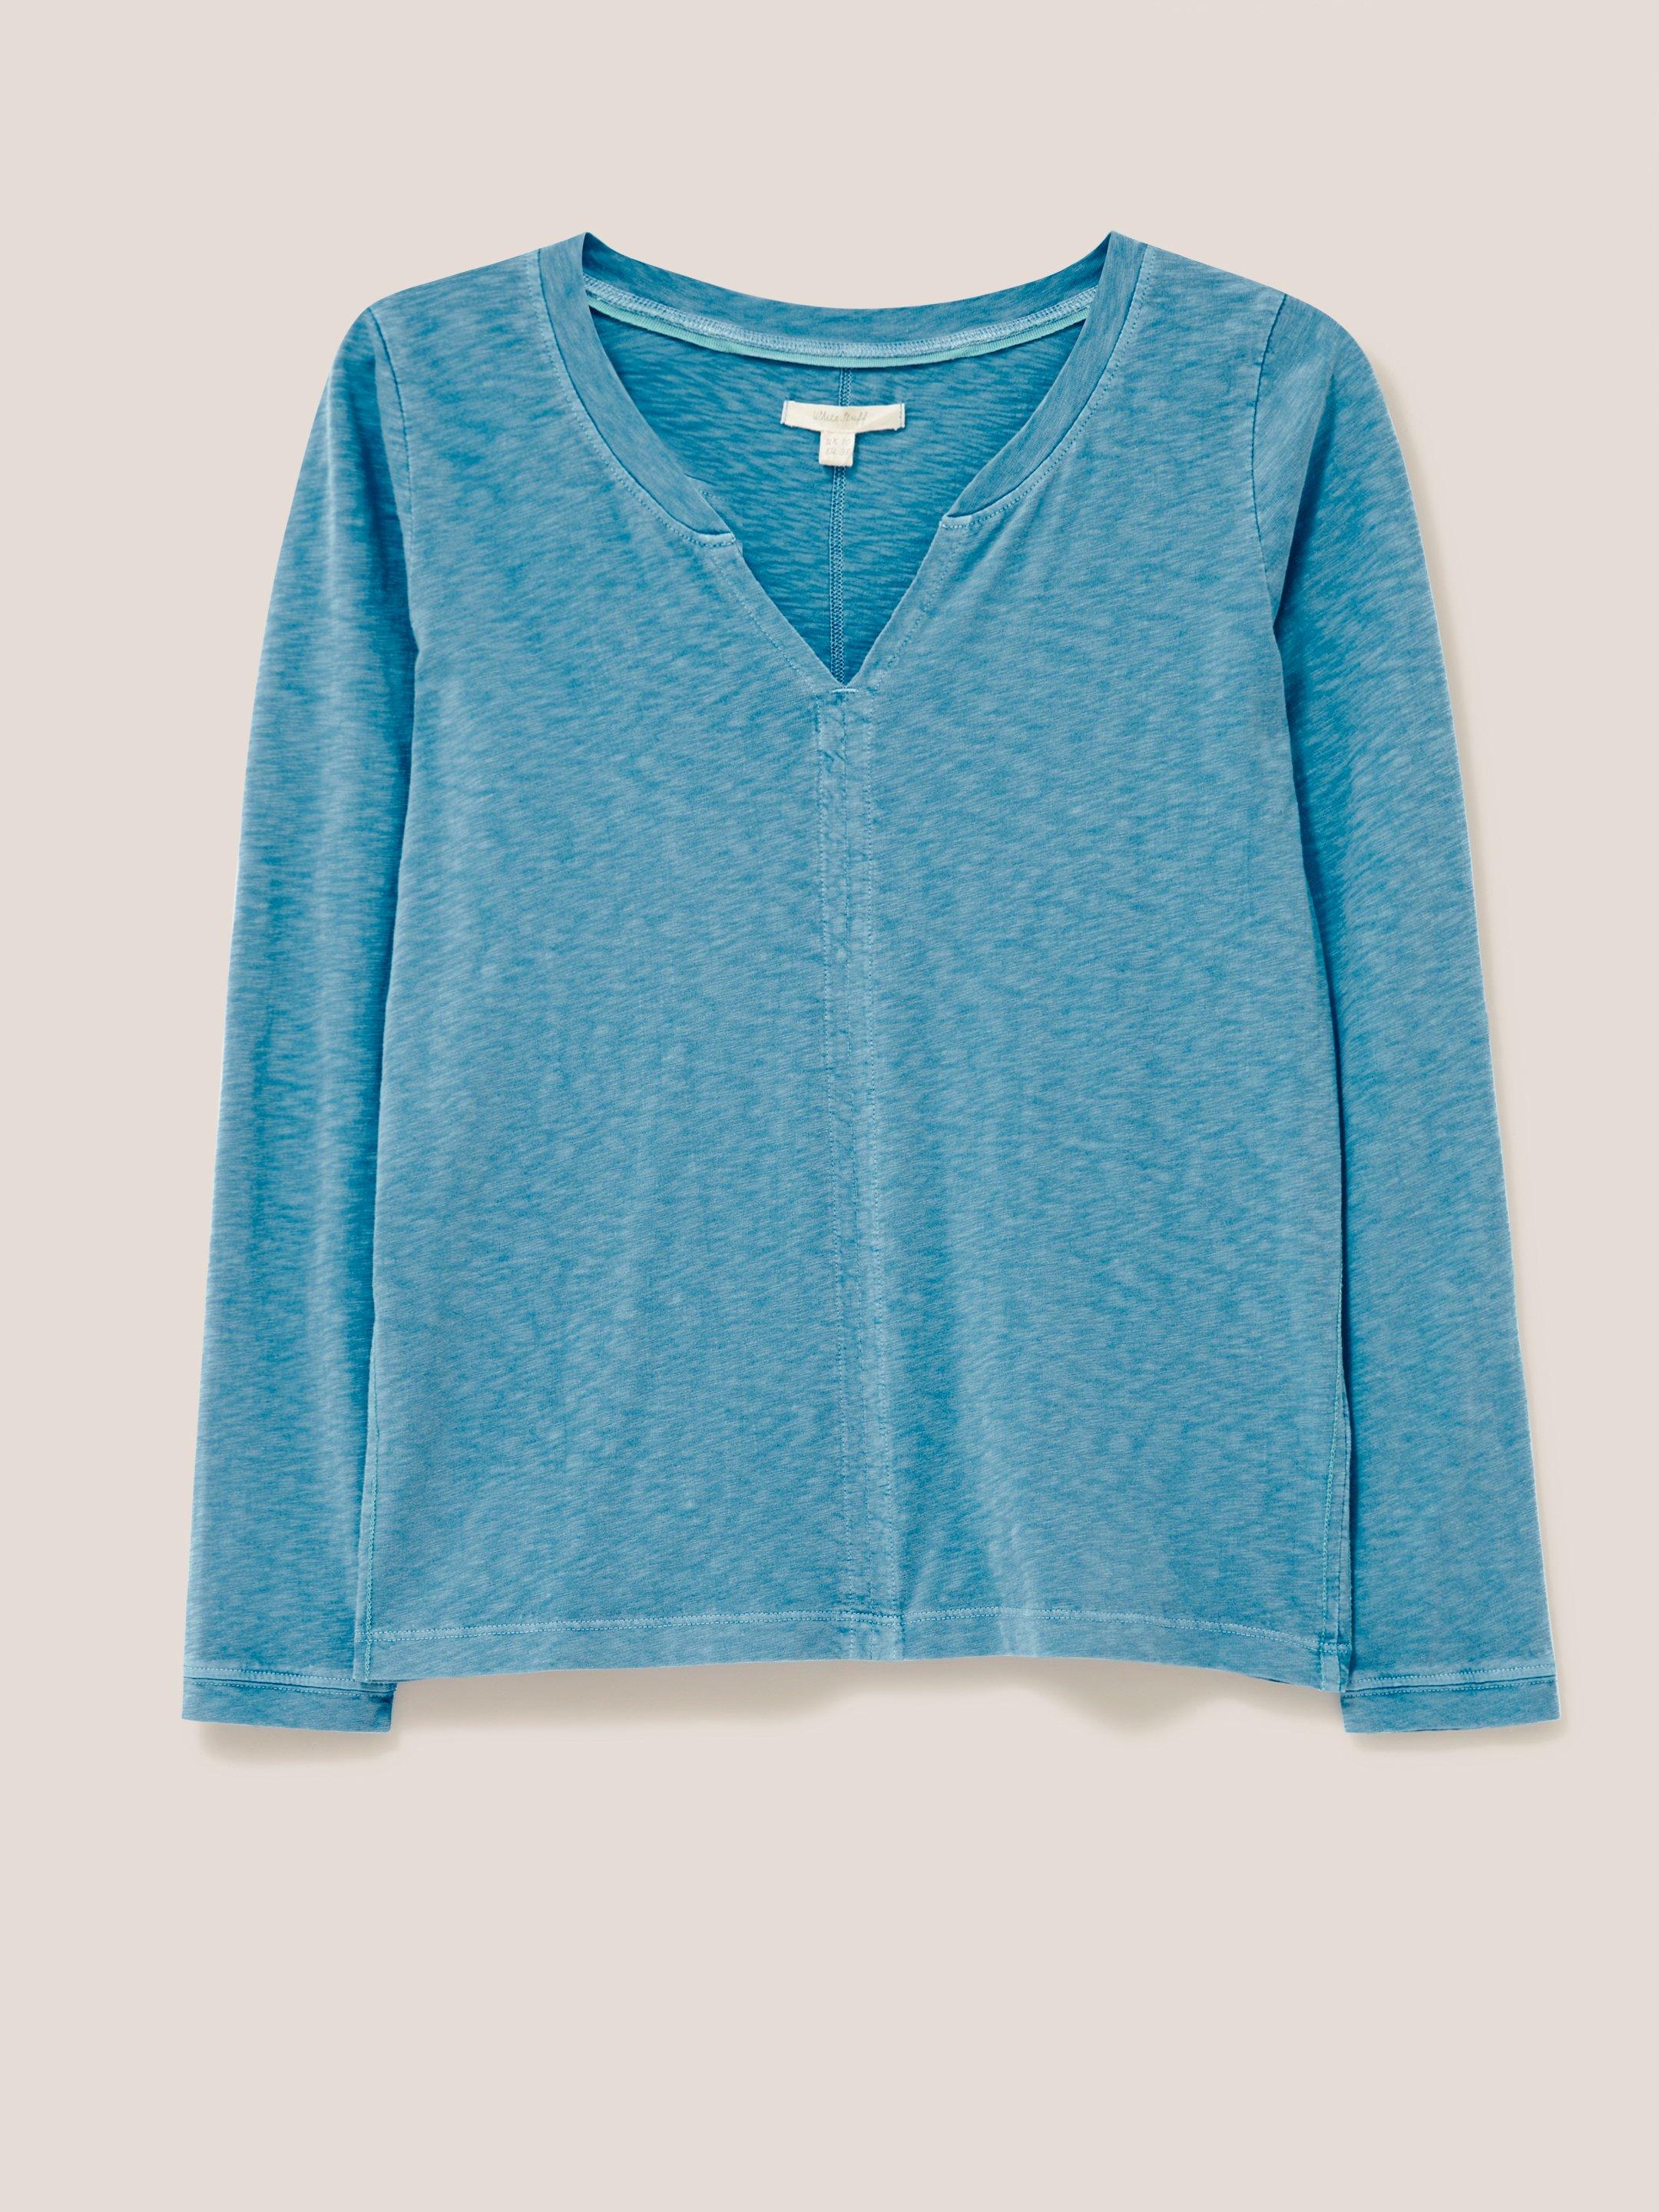 Nelly LS Tee in MID BLUE - FLAT FRONT